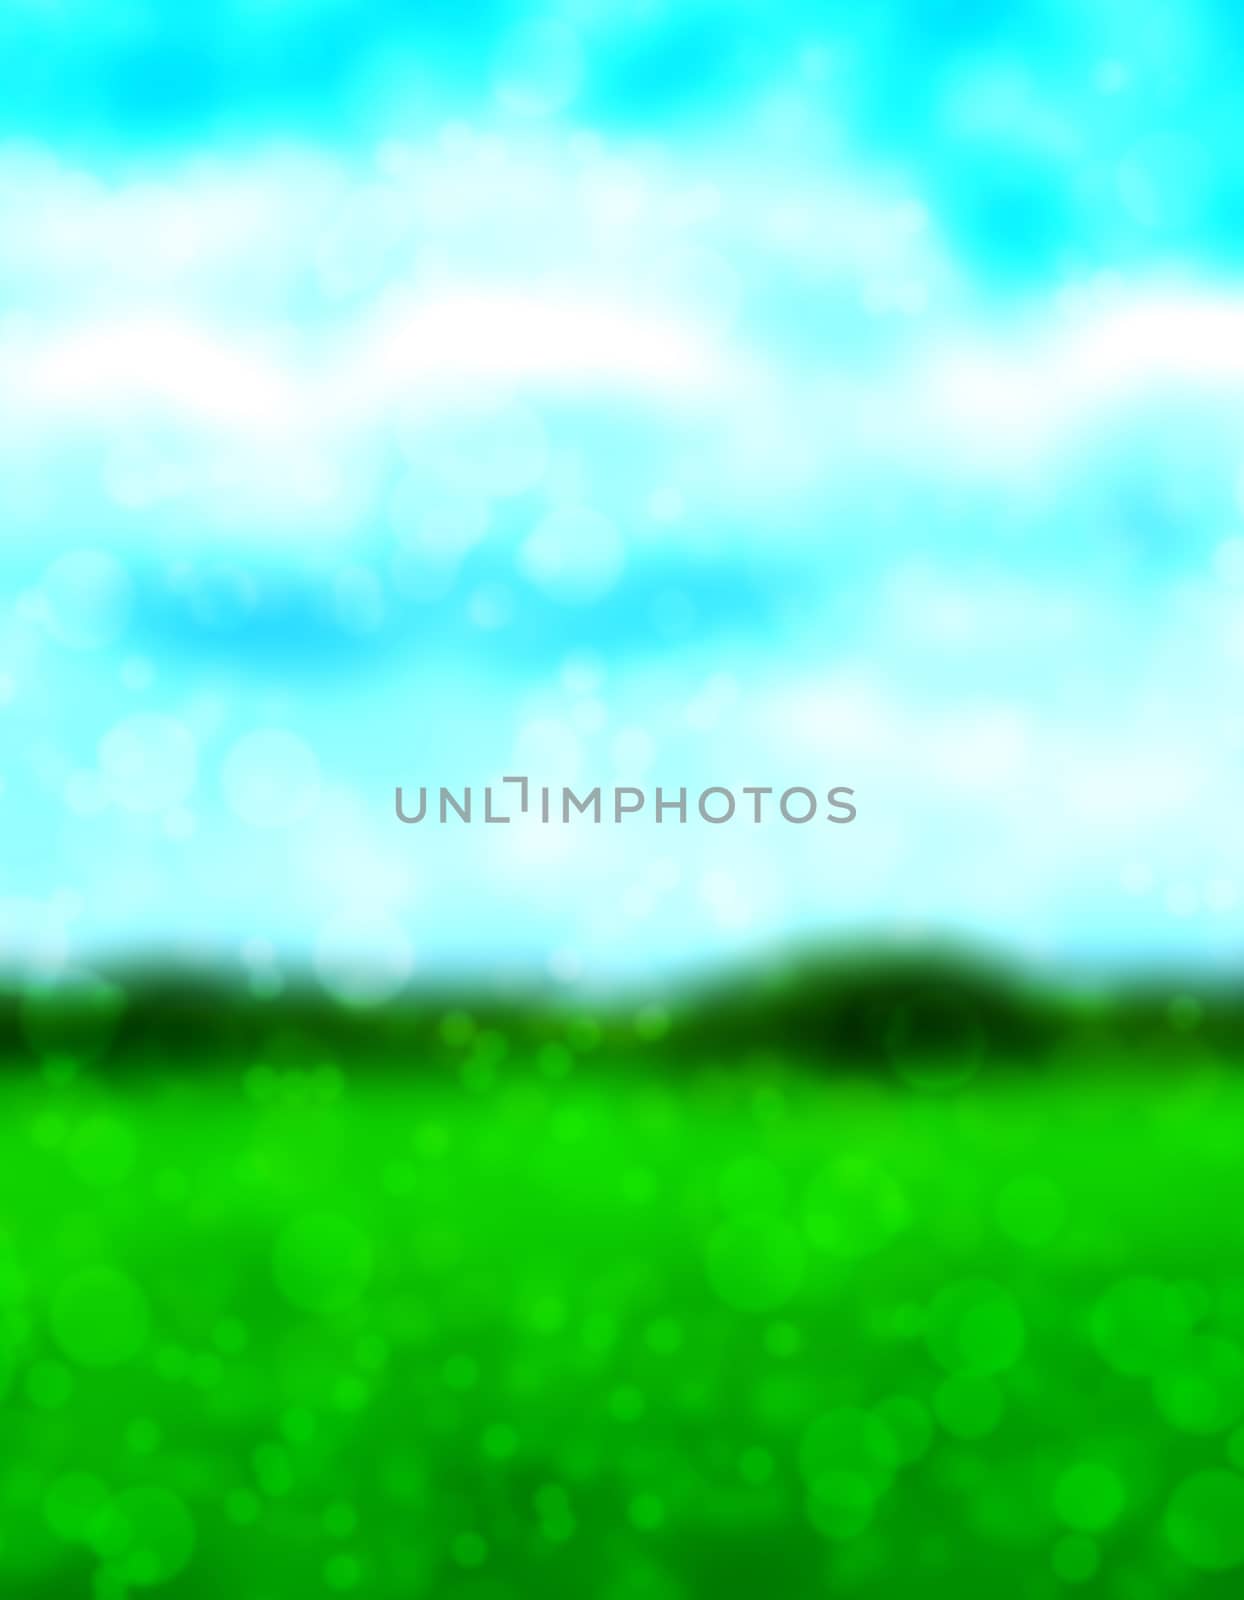 Soft and blurred bokeh background by kitty45